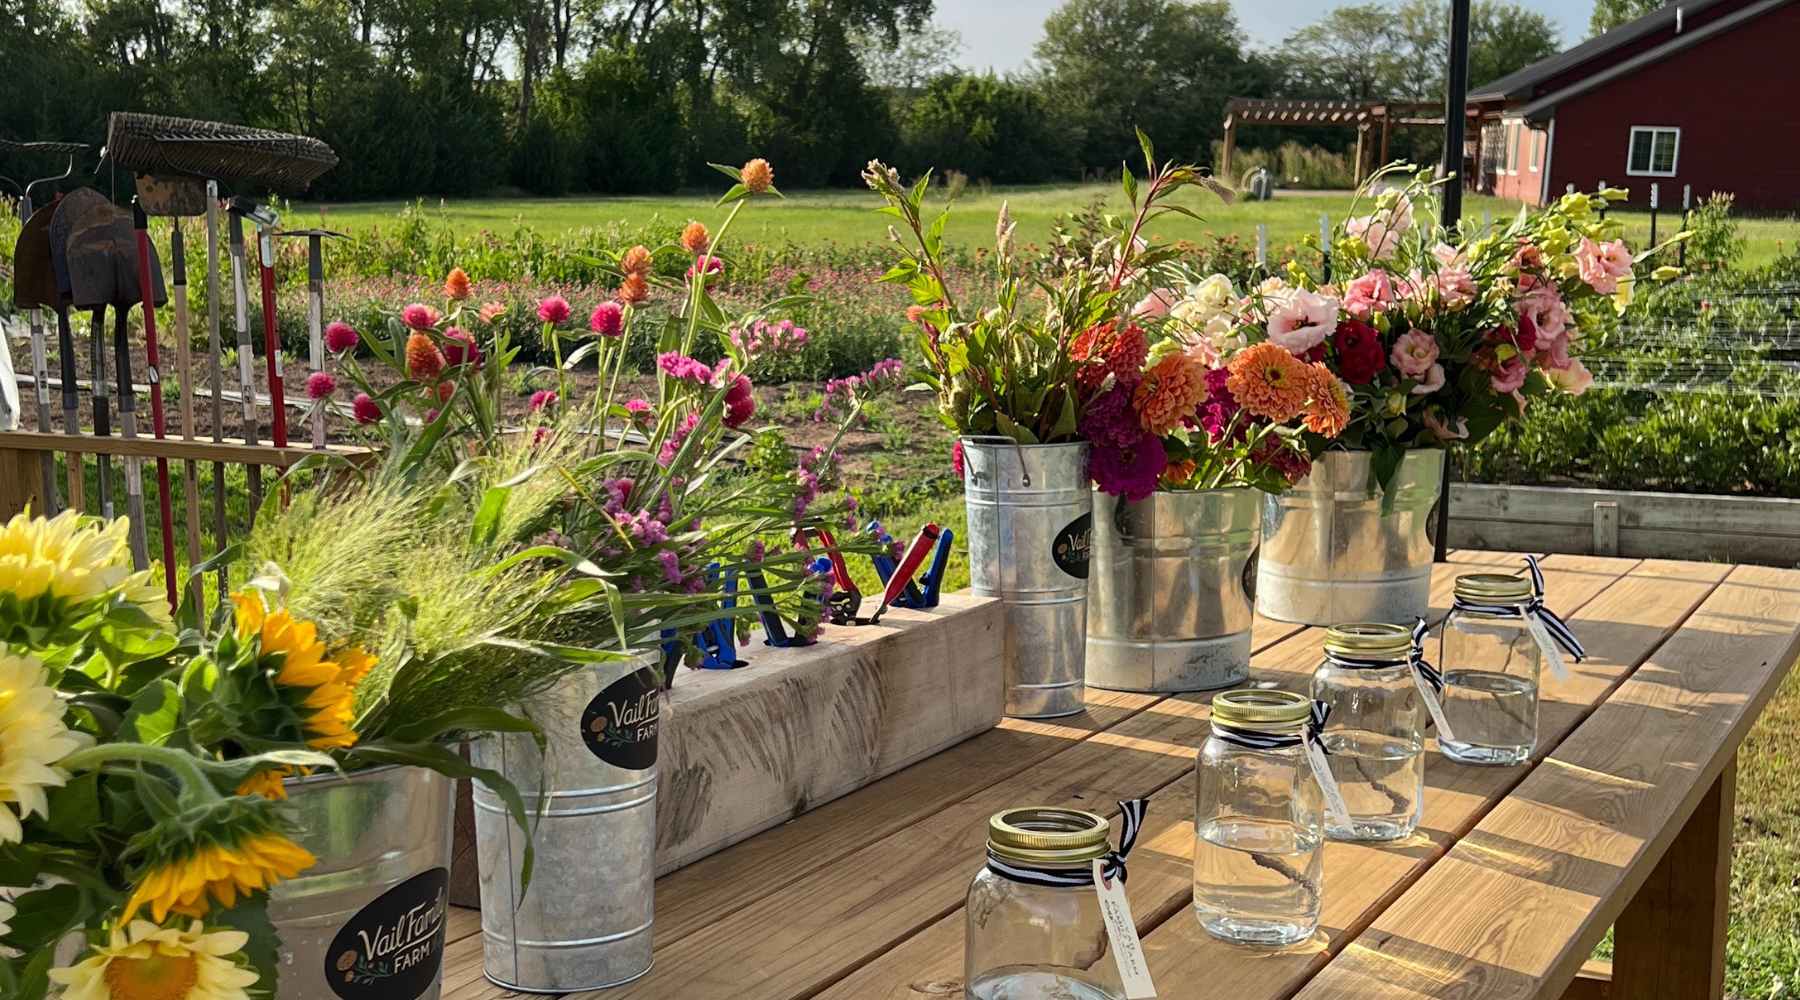 Flowers of different varieties in galvanized buckets on a wooden table with empty jars nearby for arranging bouquets. 